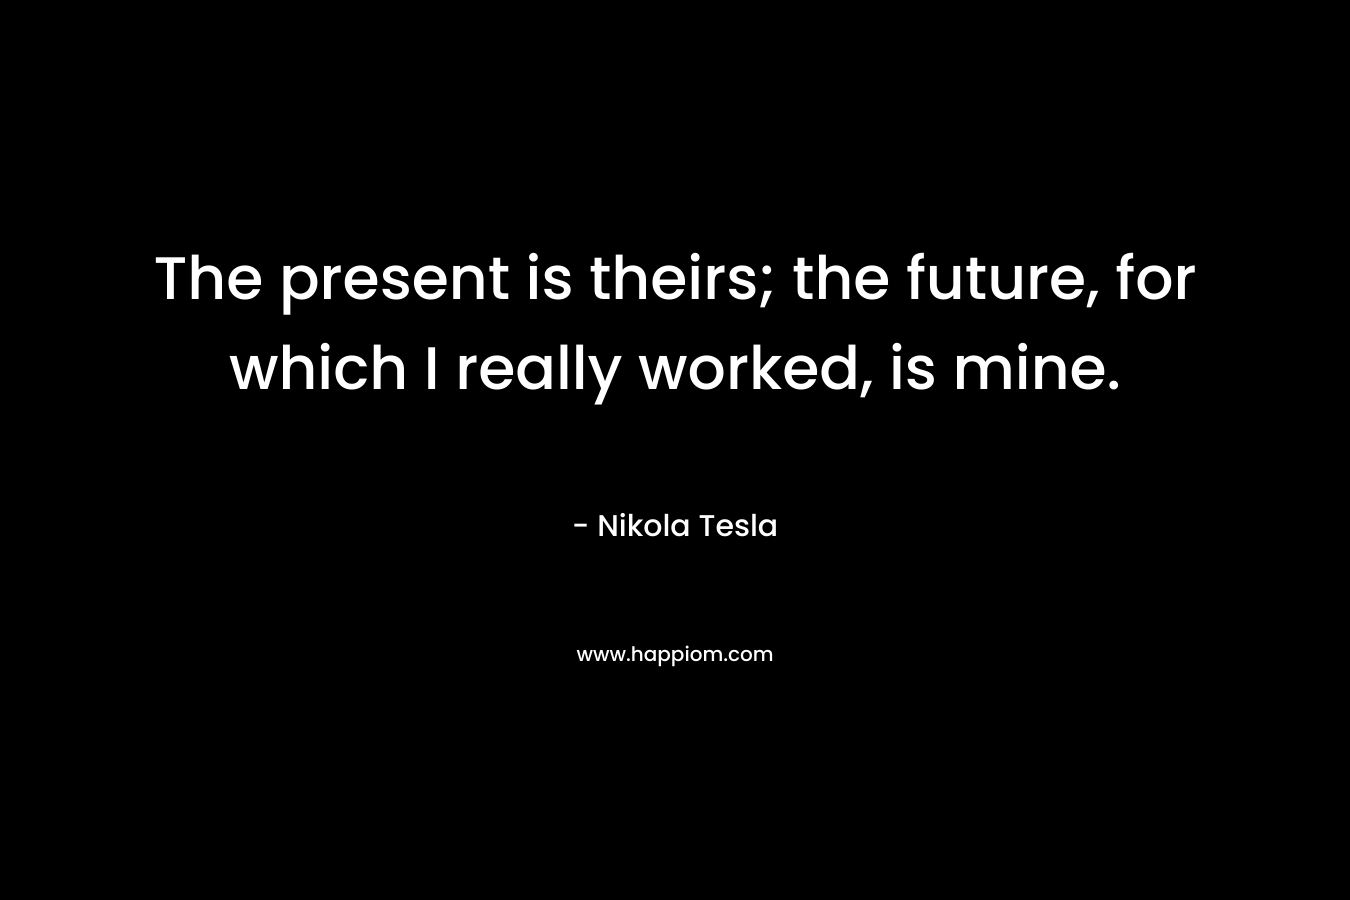 The present is theirs; the future, for which I really worked, is mine. – Nikola Tesla